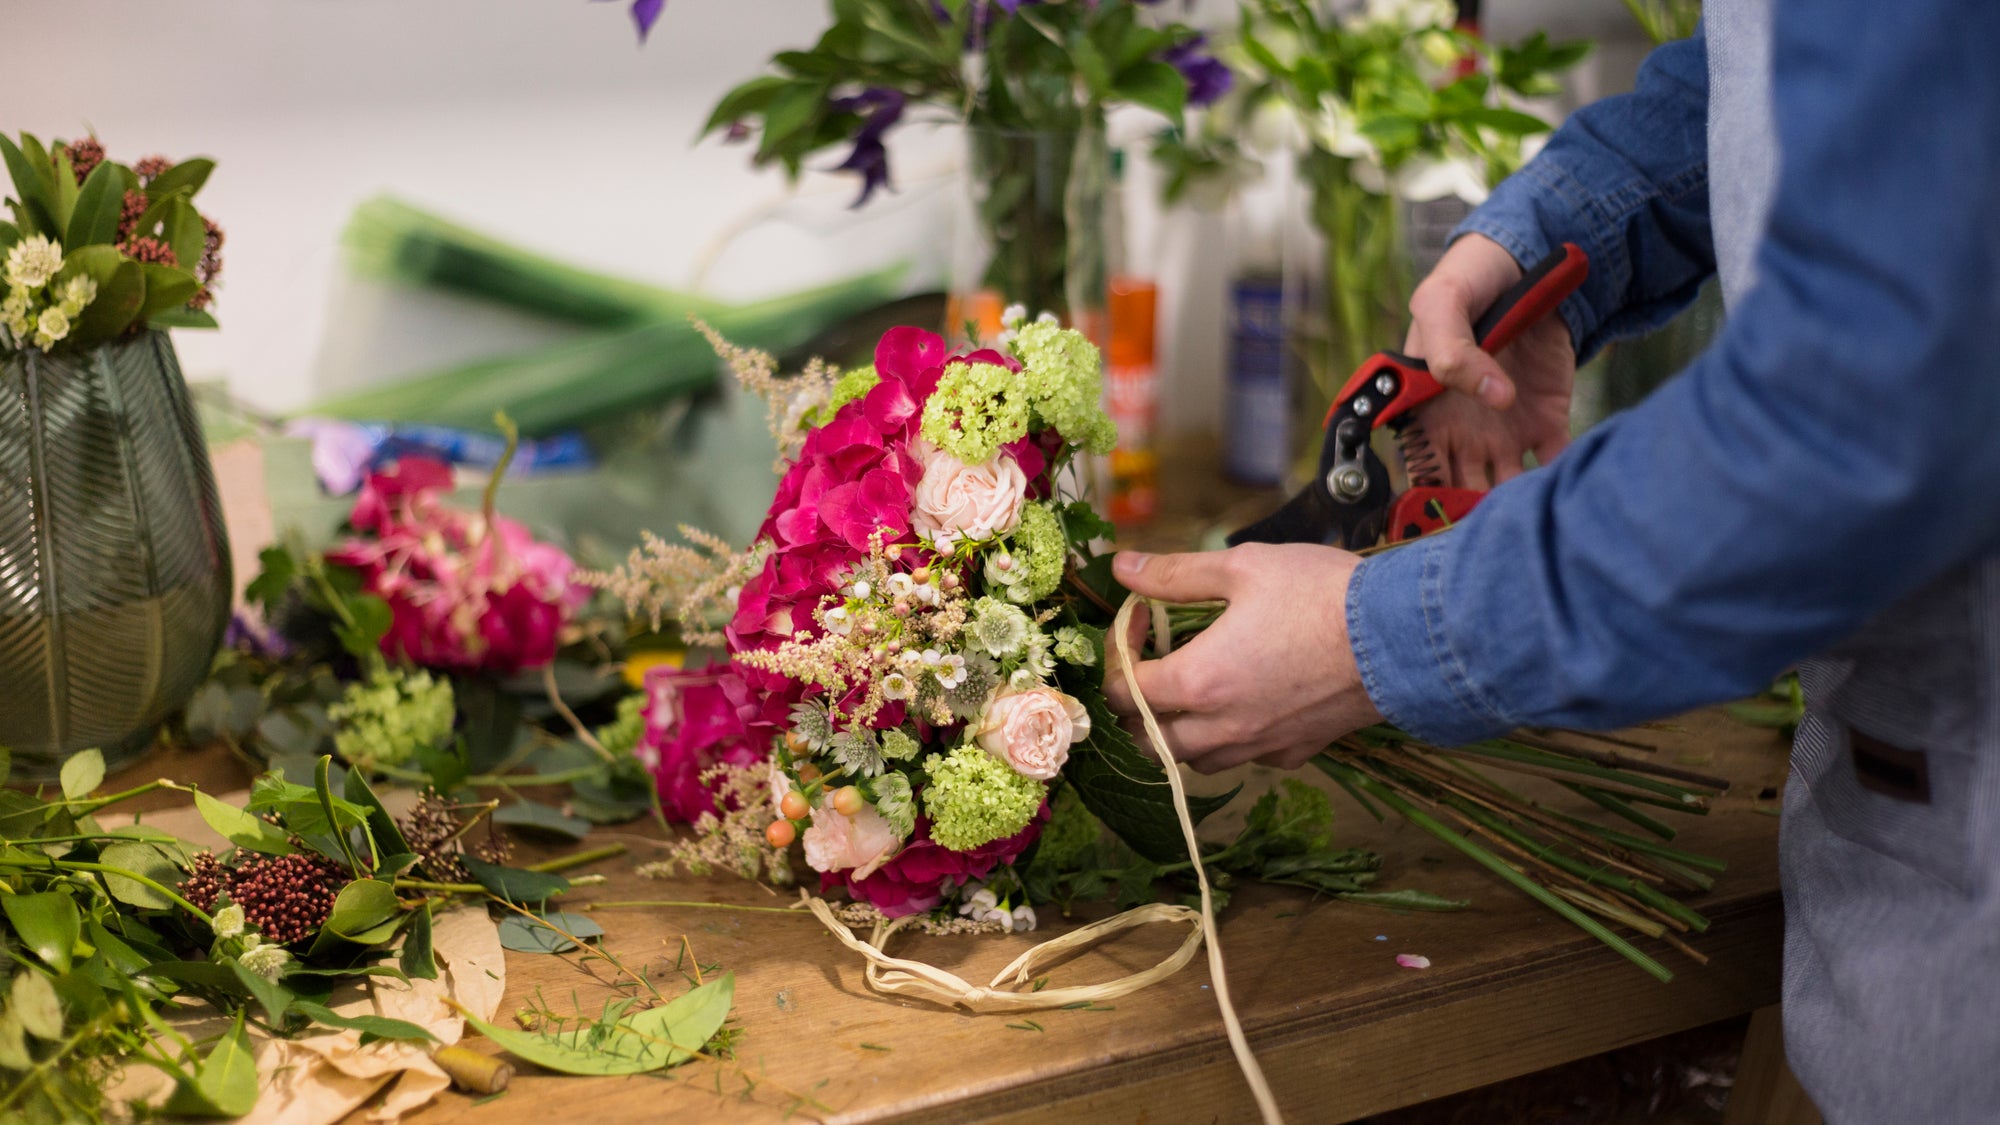 Fresh flowers are delivered in all parts of Ireland, including regional areas.